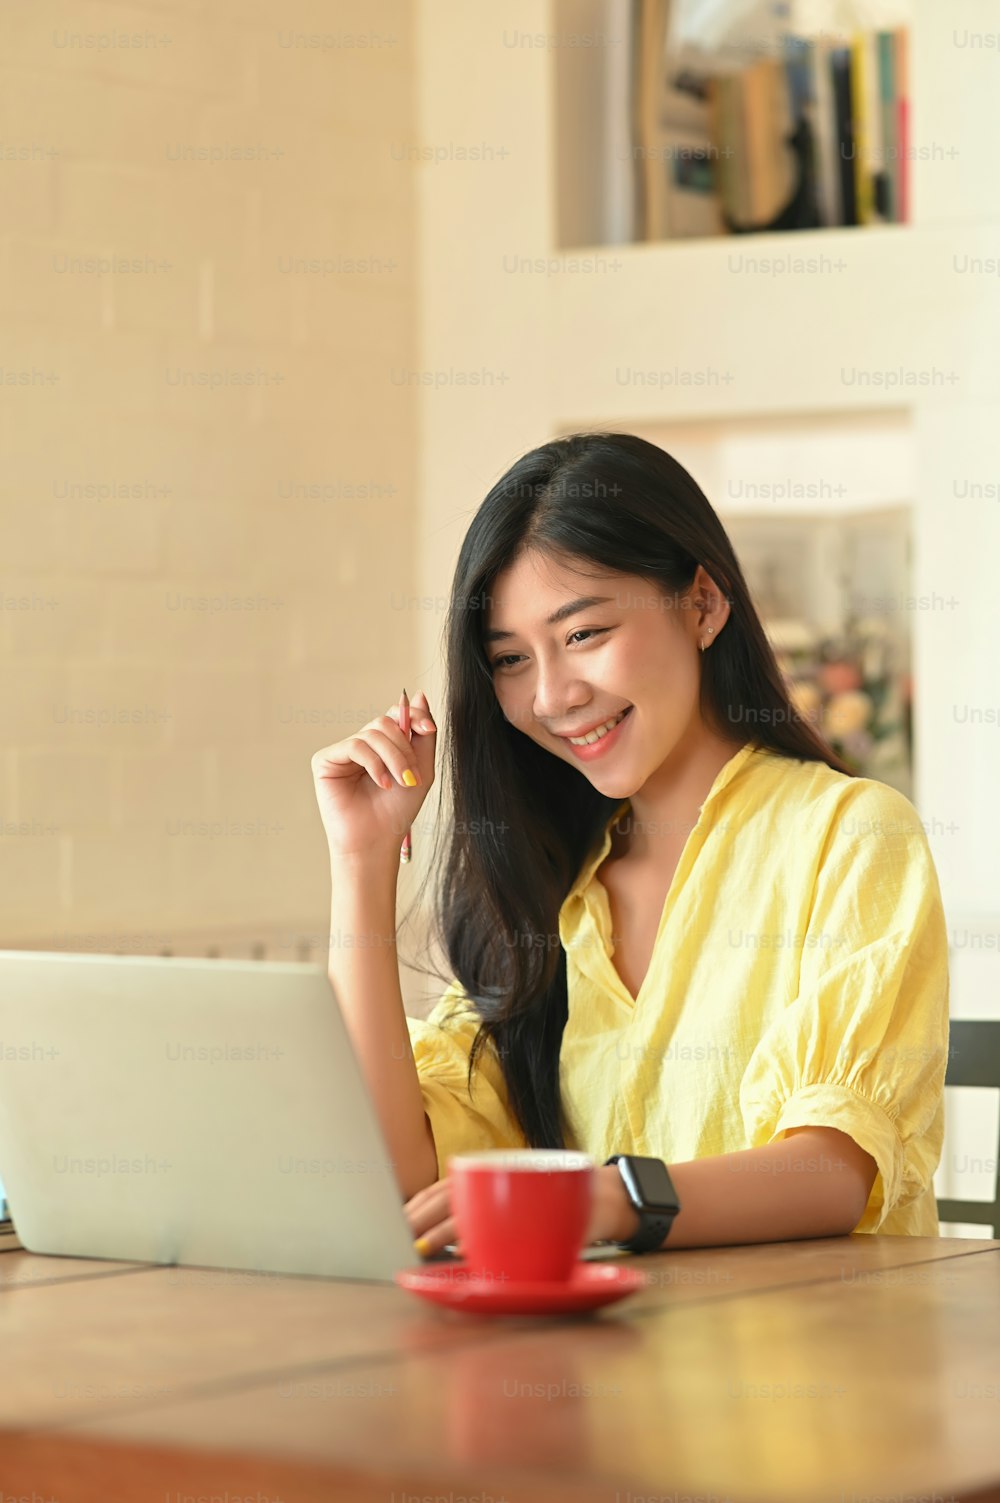 Photo of beautiful woman that look good in yellow cotton shirt smiling and staring at the computer laptop while sitting at the wooden working desk over comfortable living room as background.